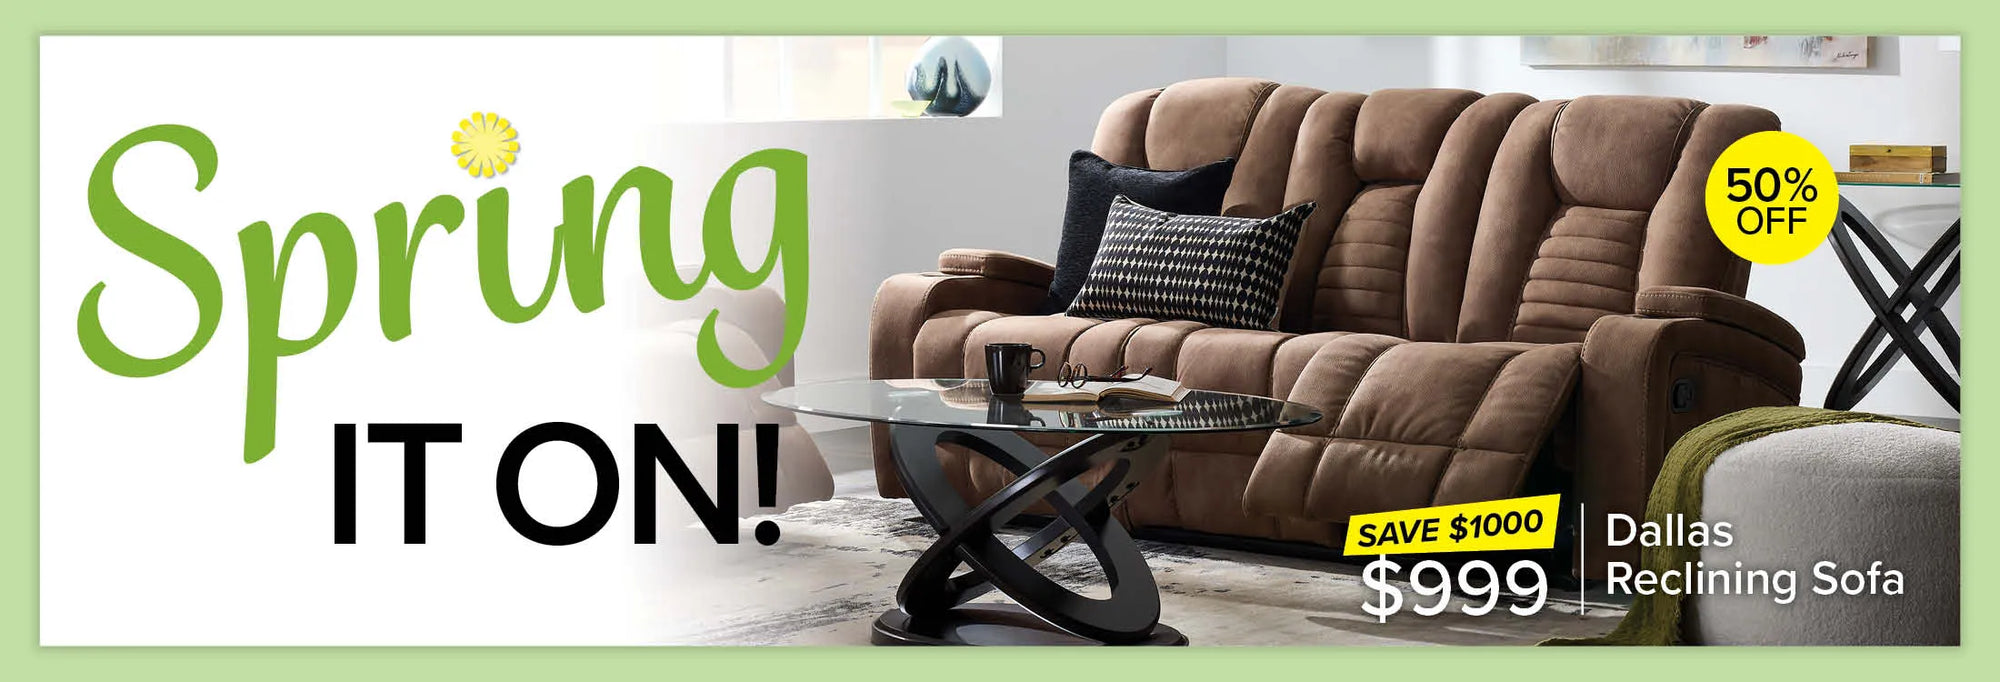 Spring it on! Save $1000 on Dallas Reclining Sofa now $999 50% off.